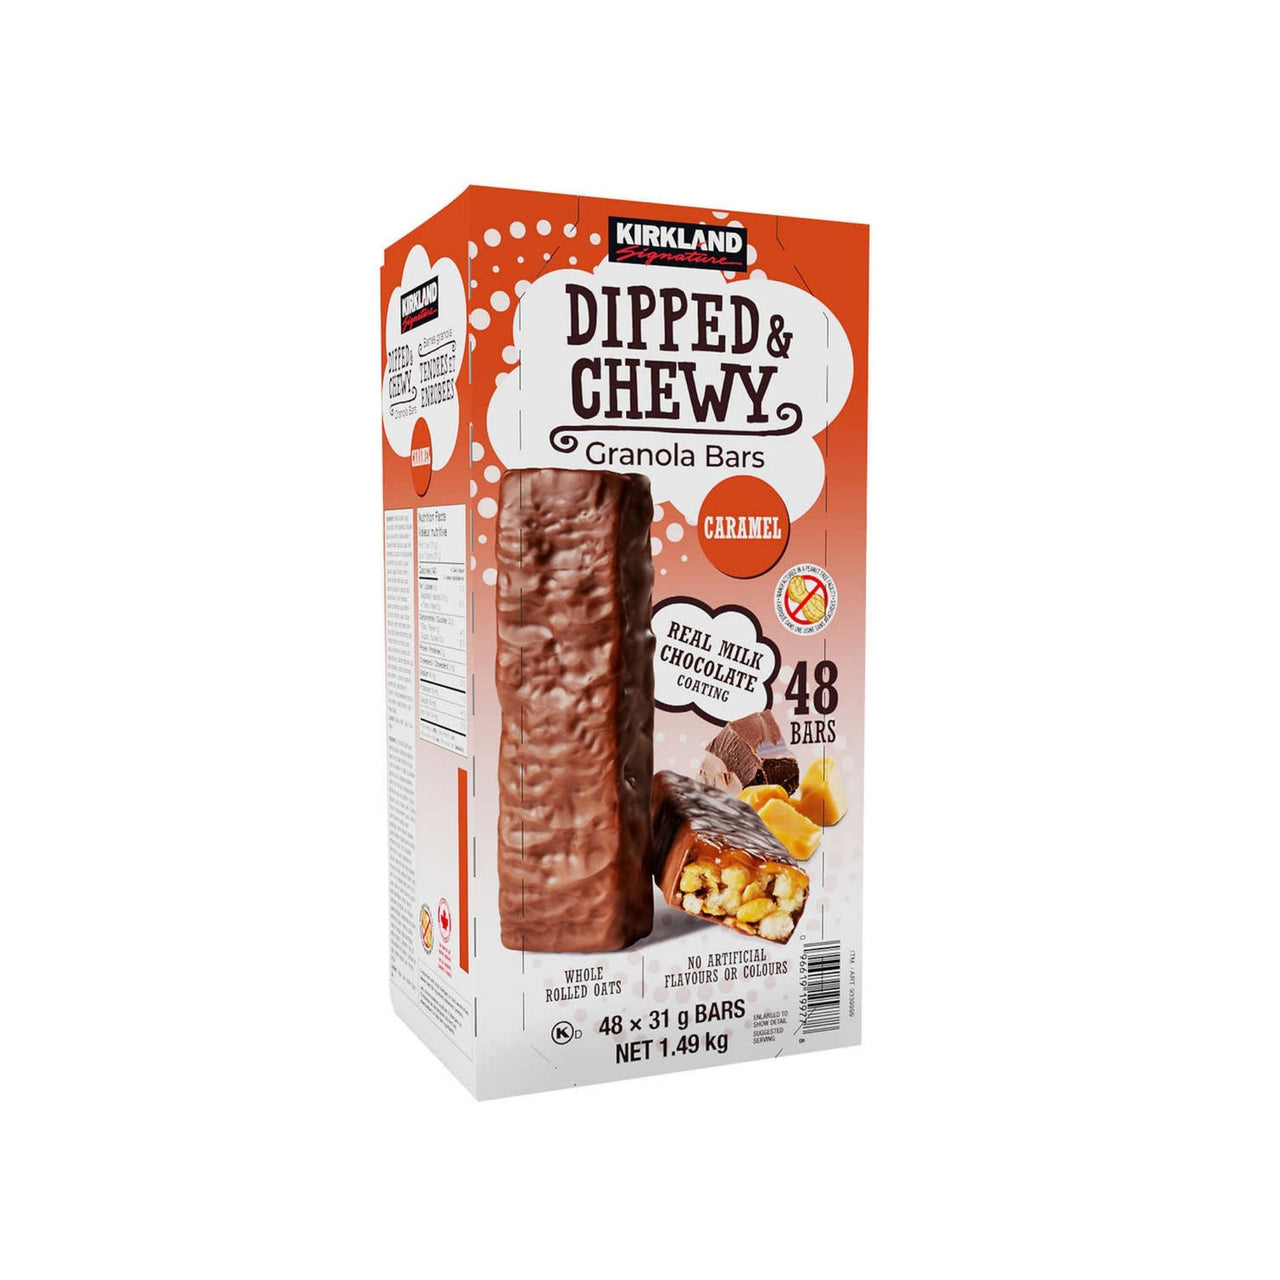 Image of Kirkland Signature Dipped and Chewy Granola Bar, 1.49kg, 48-count